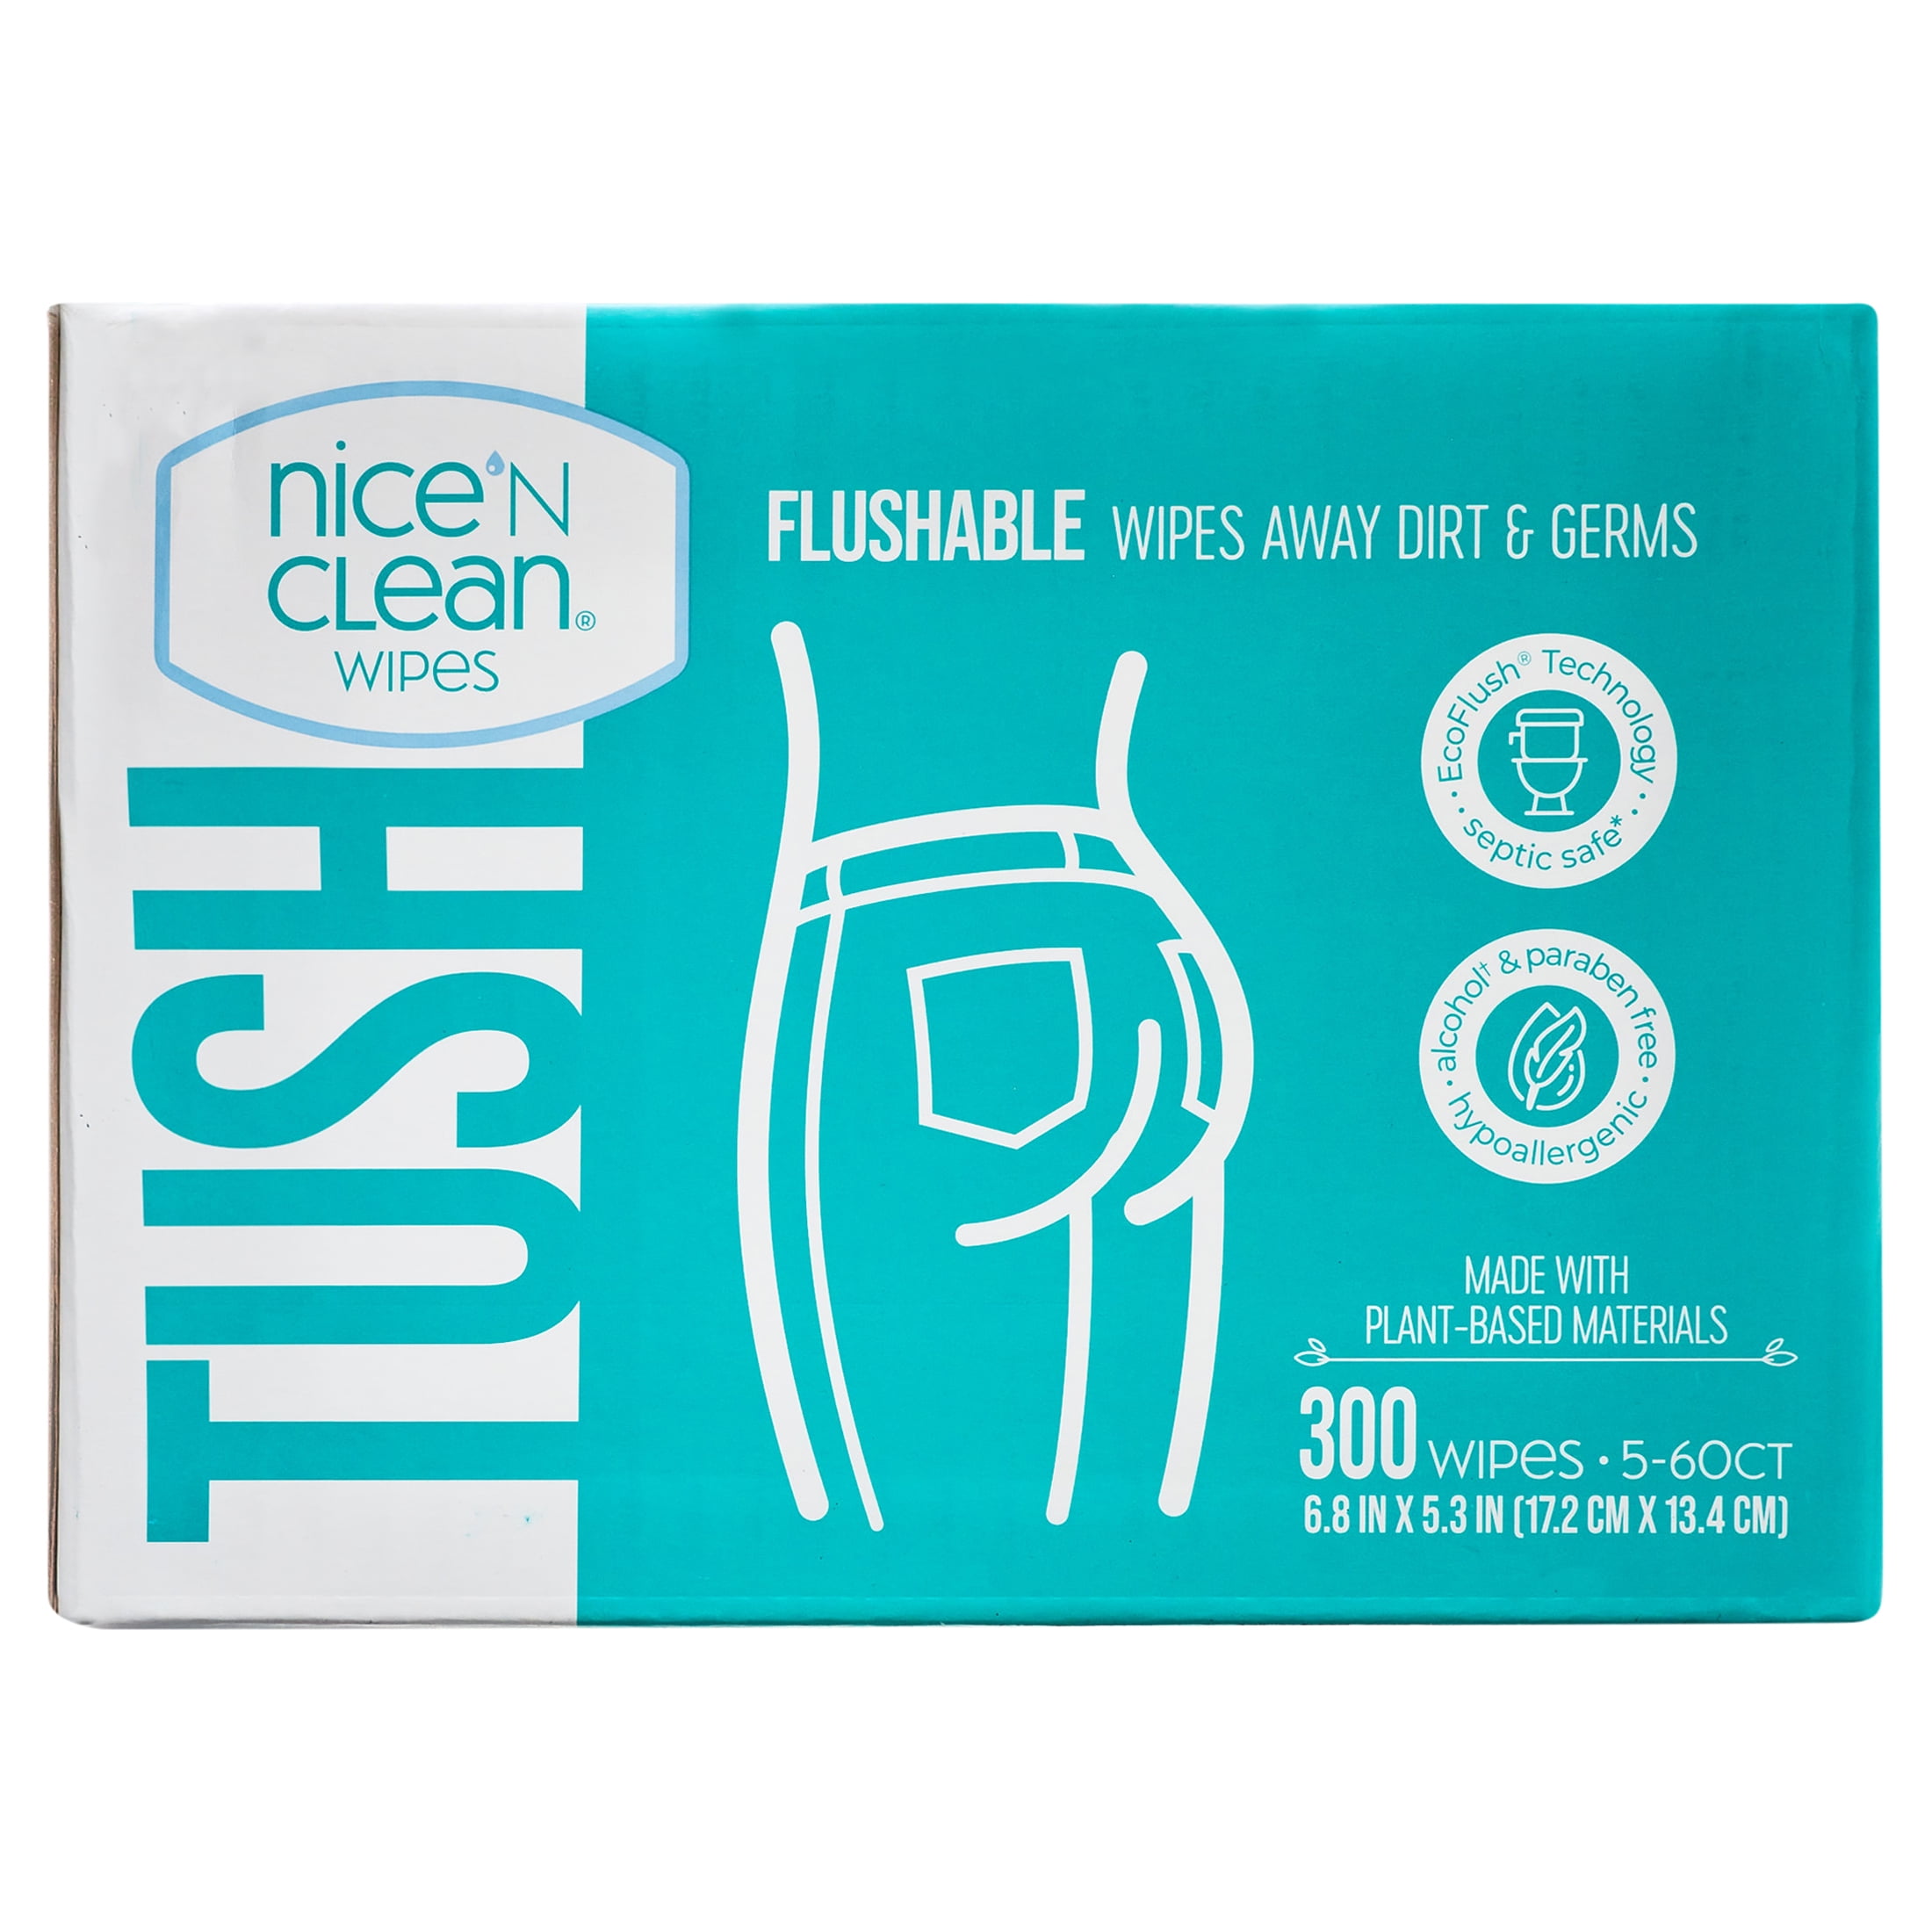 Mightygood. Wipe That Tush On-The-Go Flushable Wet Wipes - 1 Pack, 30 Wipes - Individually Wrapped Extra-Large Wipes with Aloe - Hypoallergenic & UNS